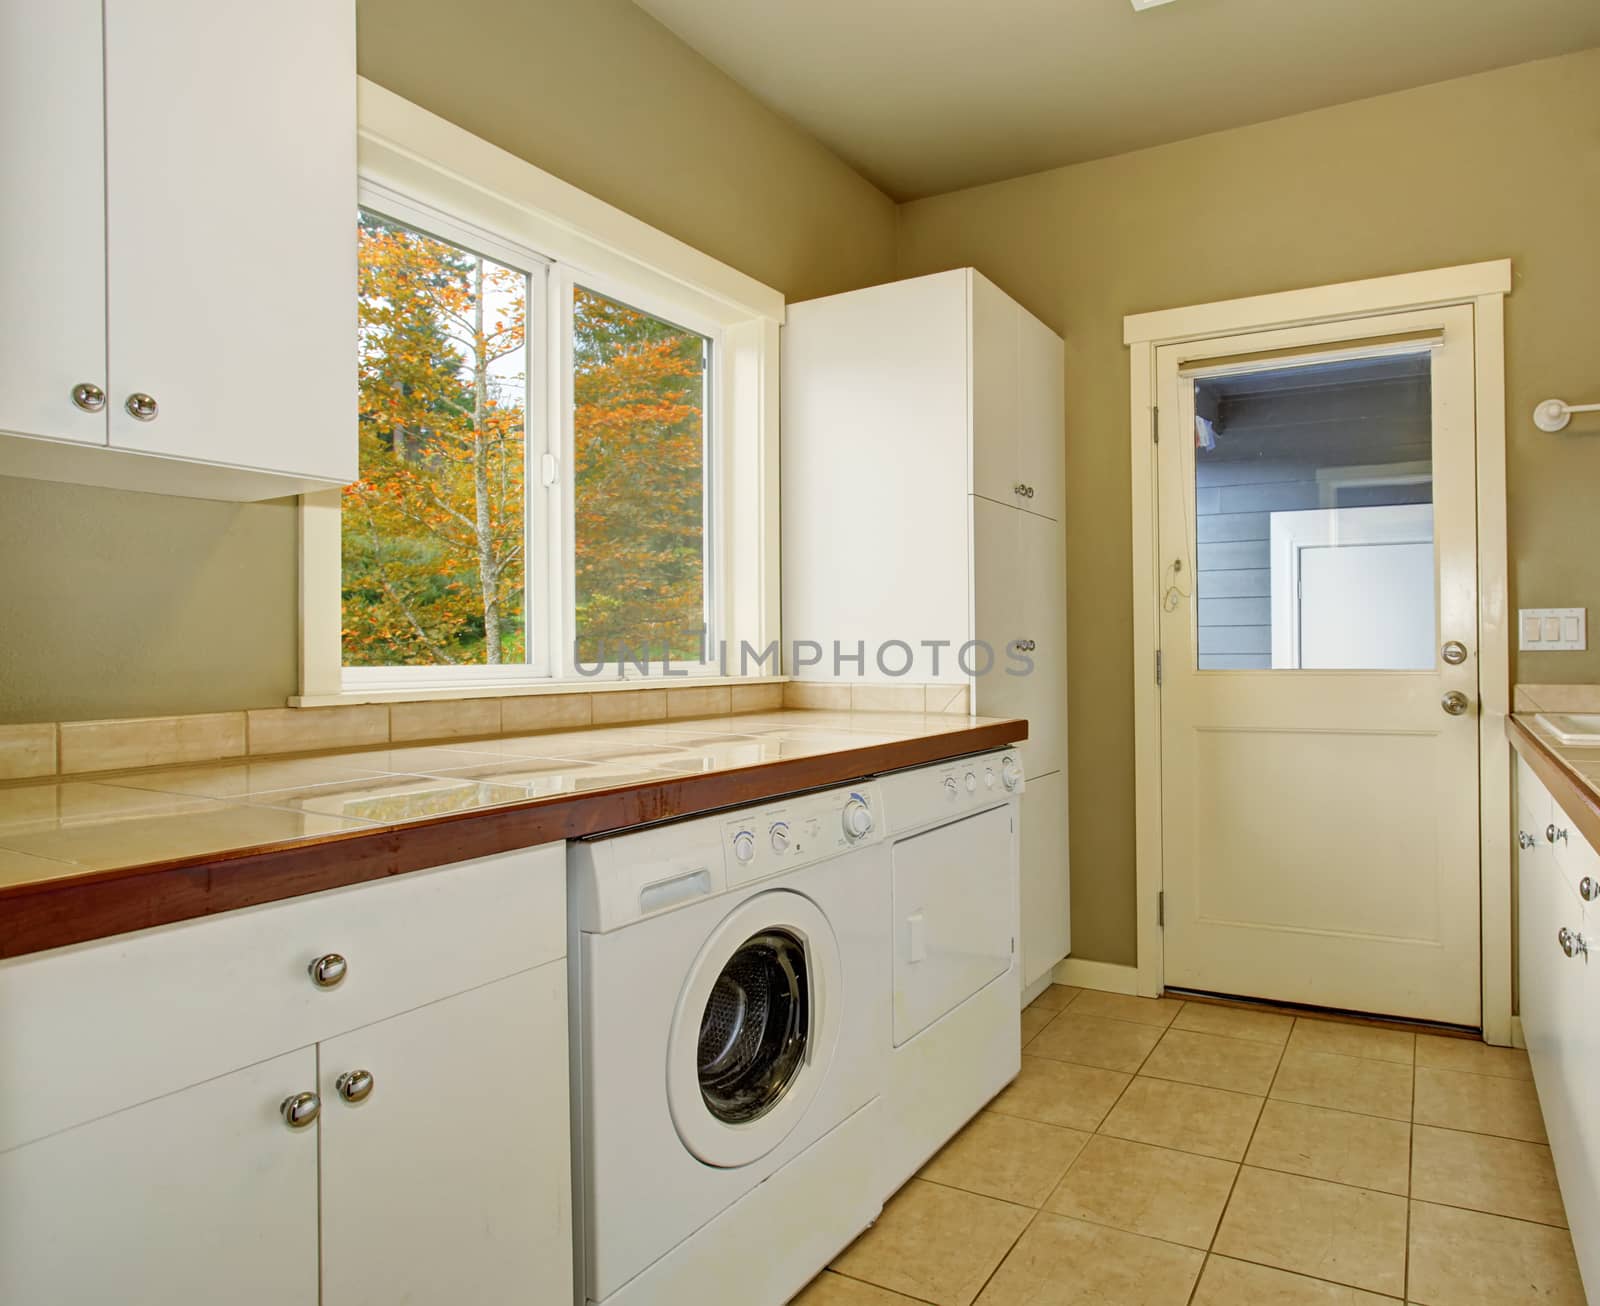 Laundry room with cabinets, tile counters, washer, and dryer.